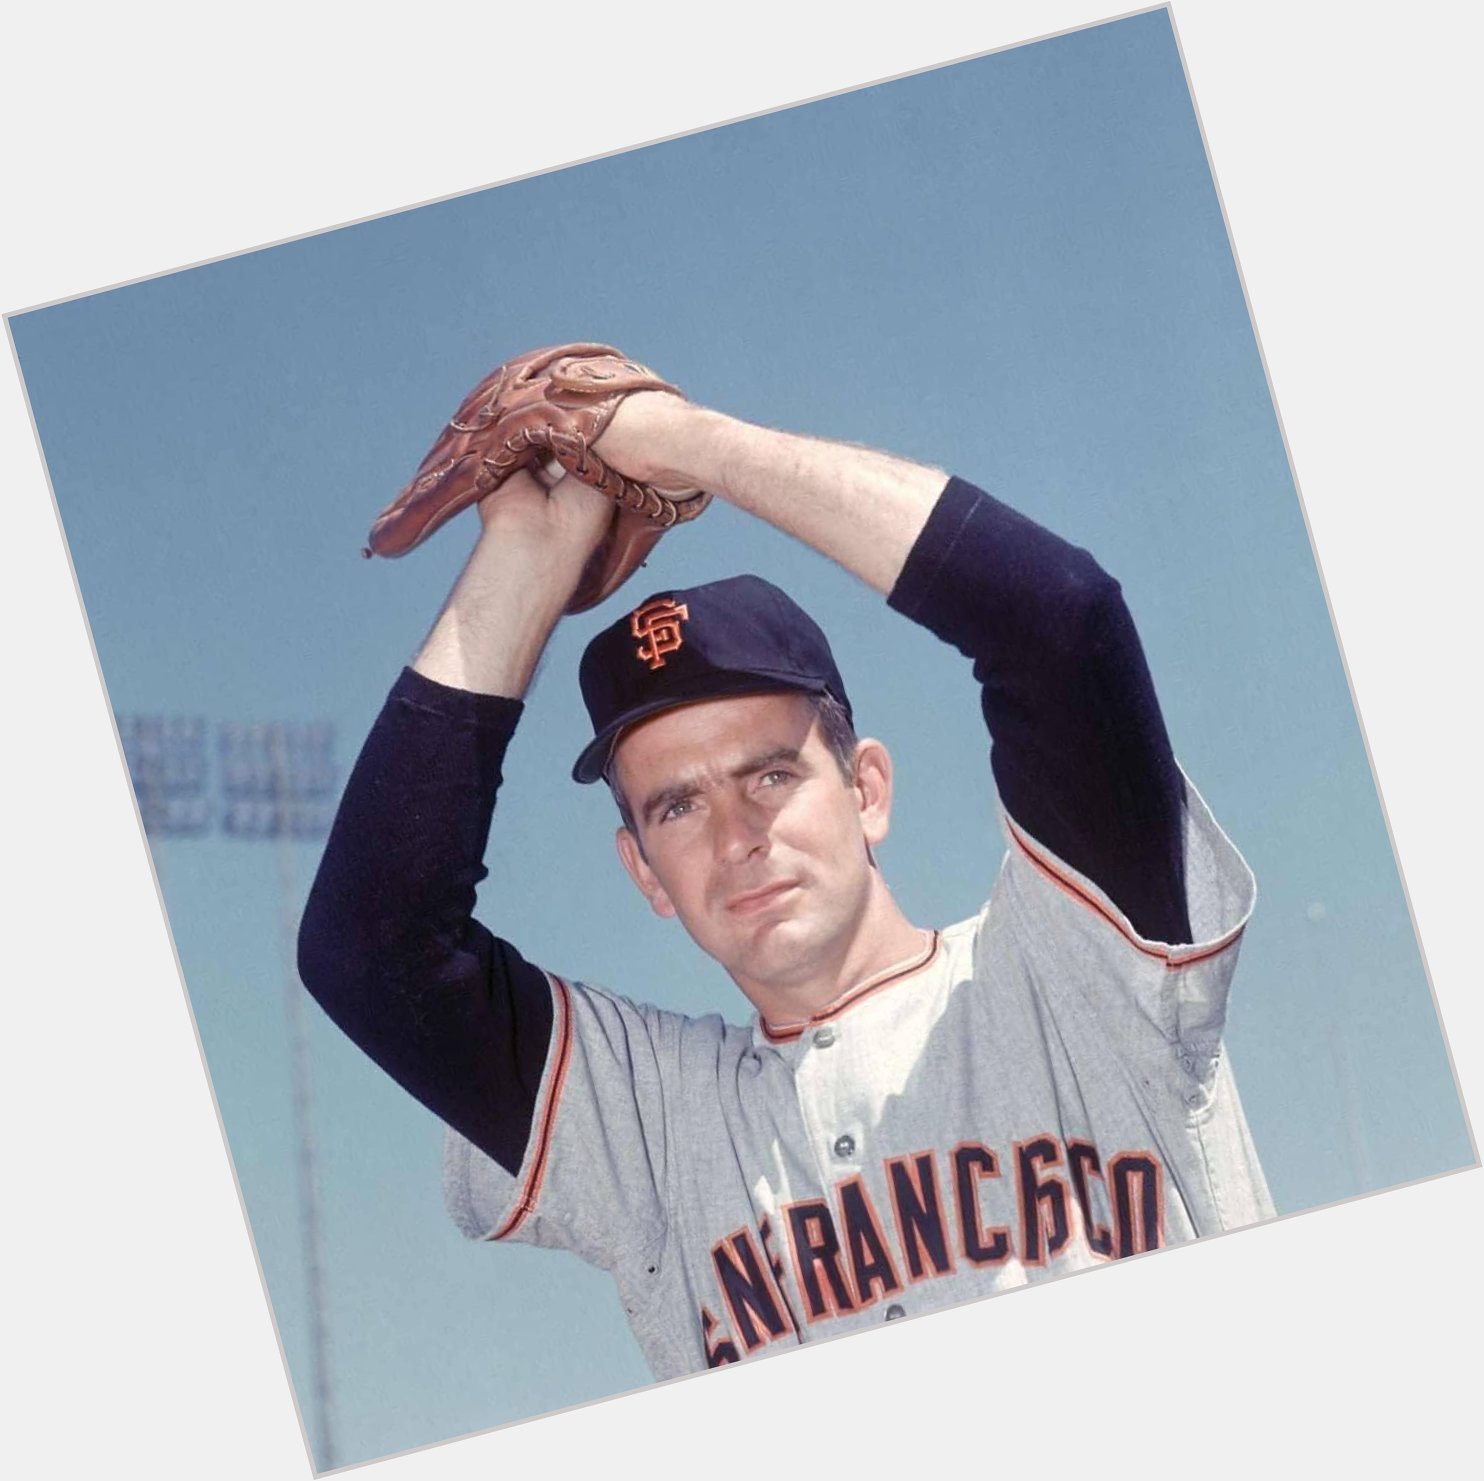 Happy 84th birthday to former San Francisco Giants pitcher Gaylord Perry!

(September 15, 1938) 